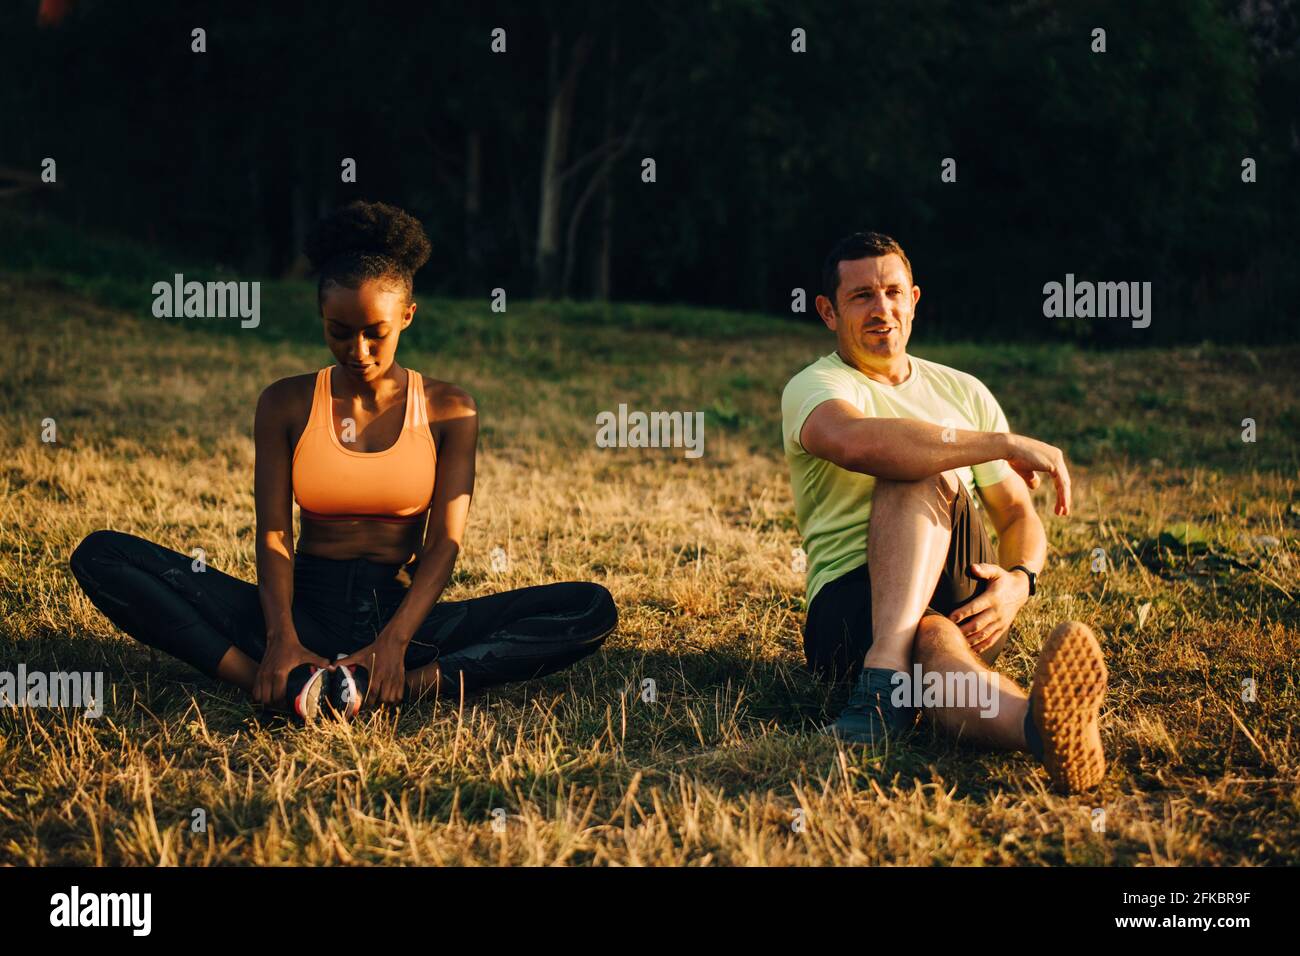 Sportsman and sportswoman doing relaxation exercise while sitting on grassy area Stock Photo